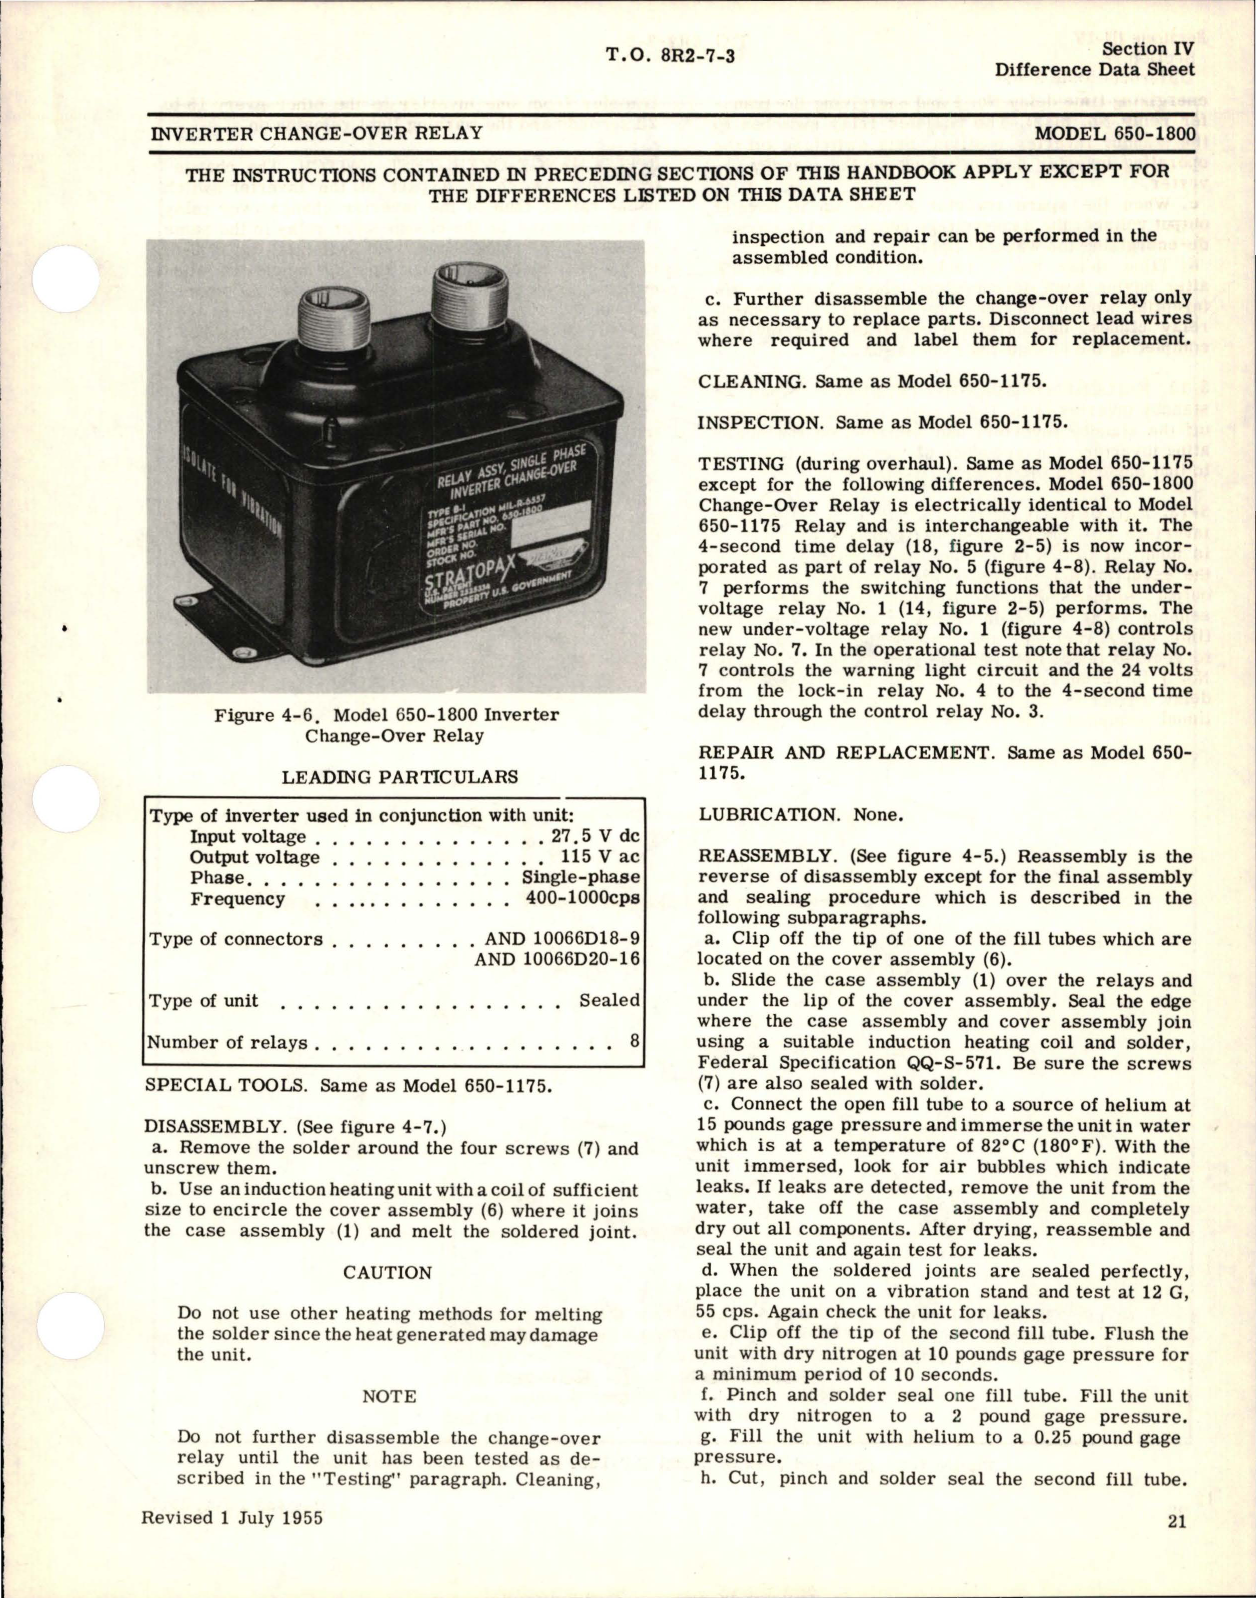 Sample page 5 from AirCorps Library document: Overhaul Instructions for Inverter Change-Over Relays 